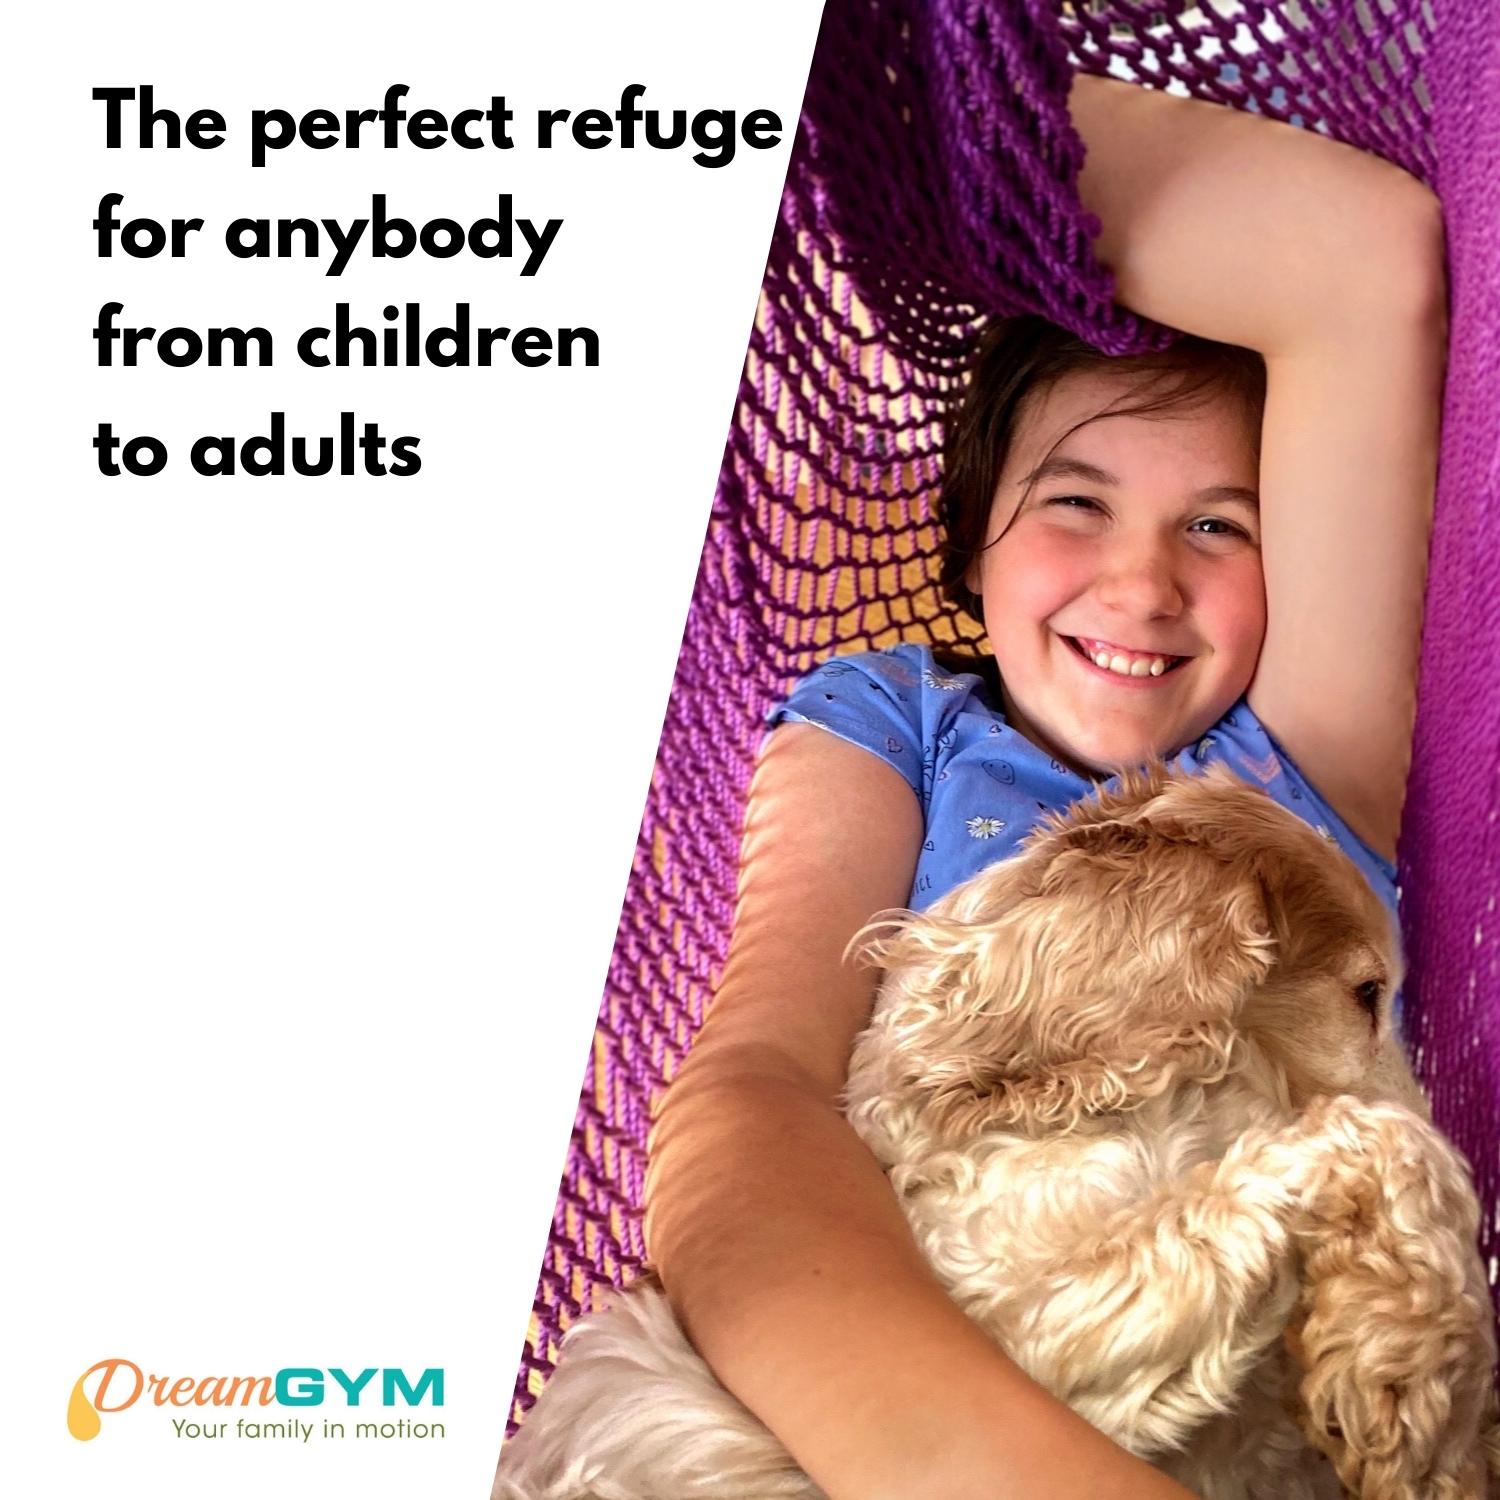 A girl is in hammock swing with her puppy. Hammock swing is the perfect refuge for anybody from children to adults.